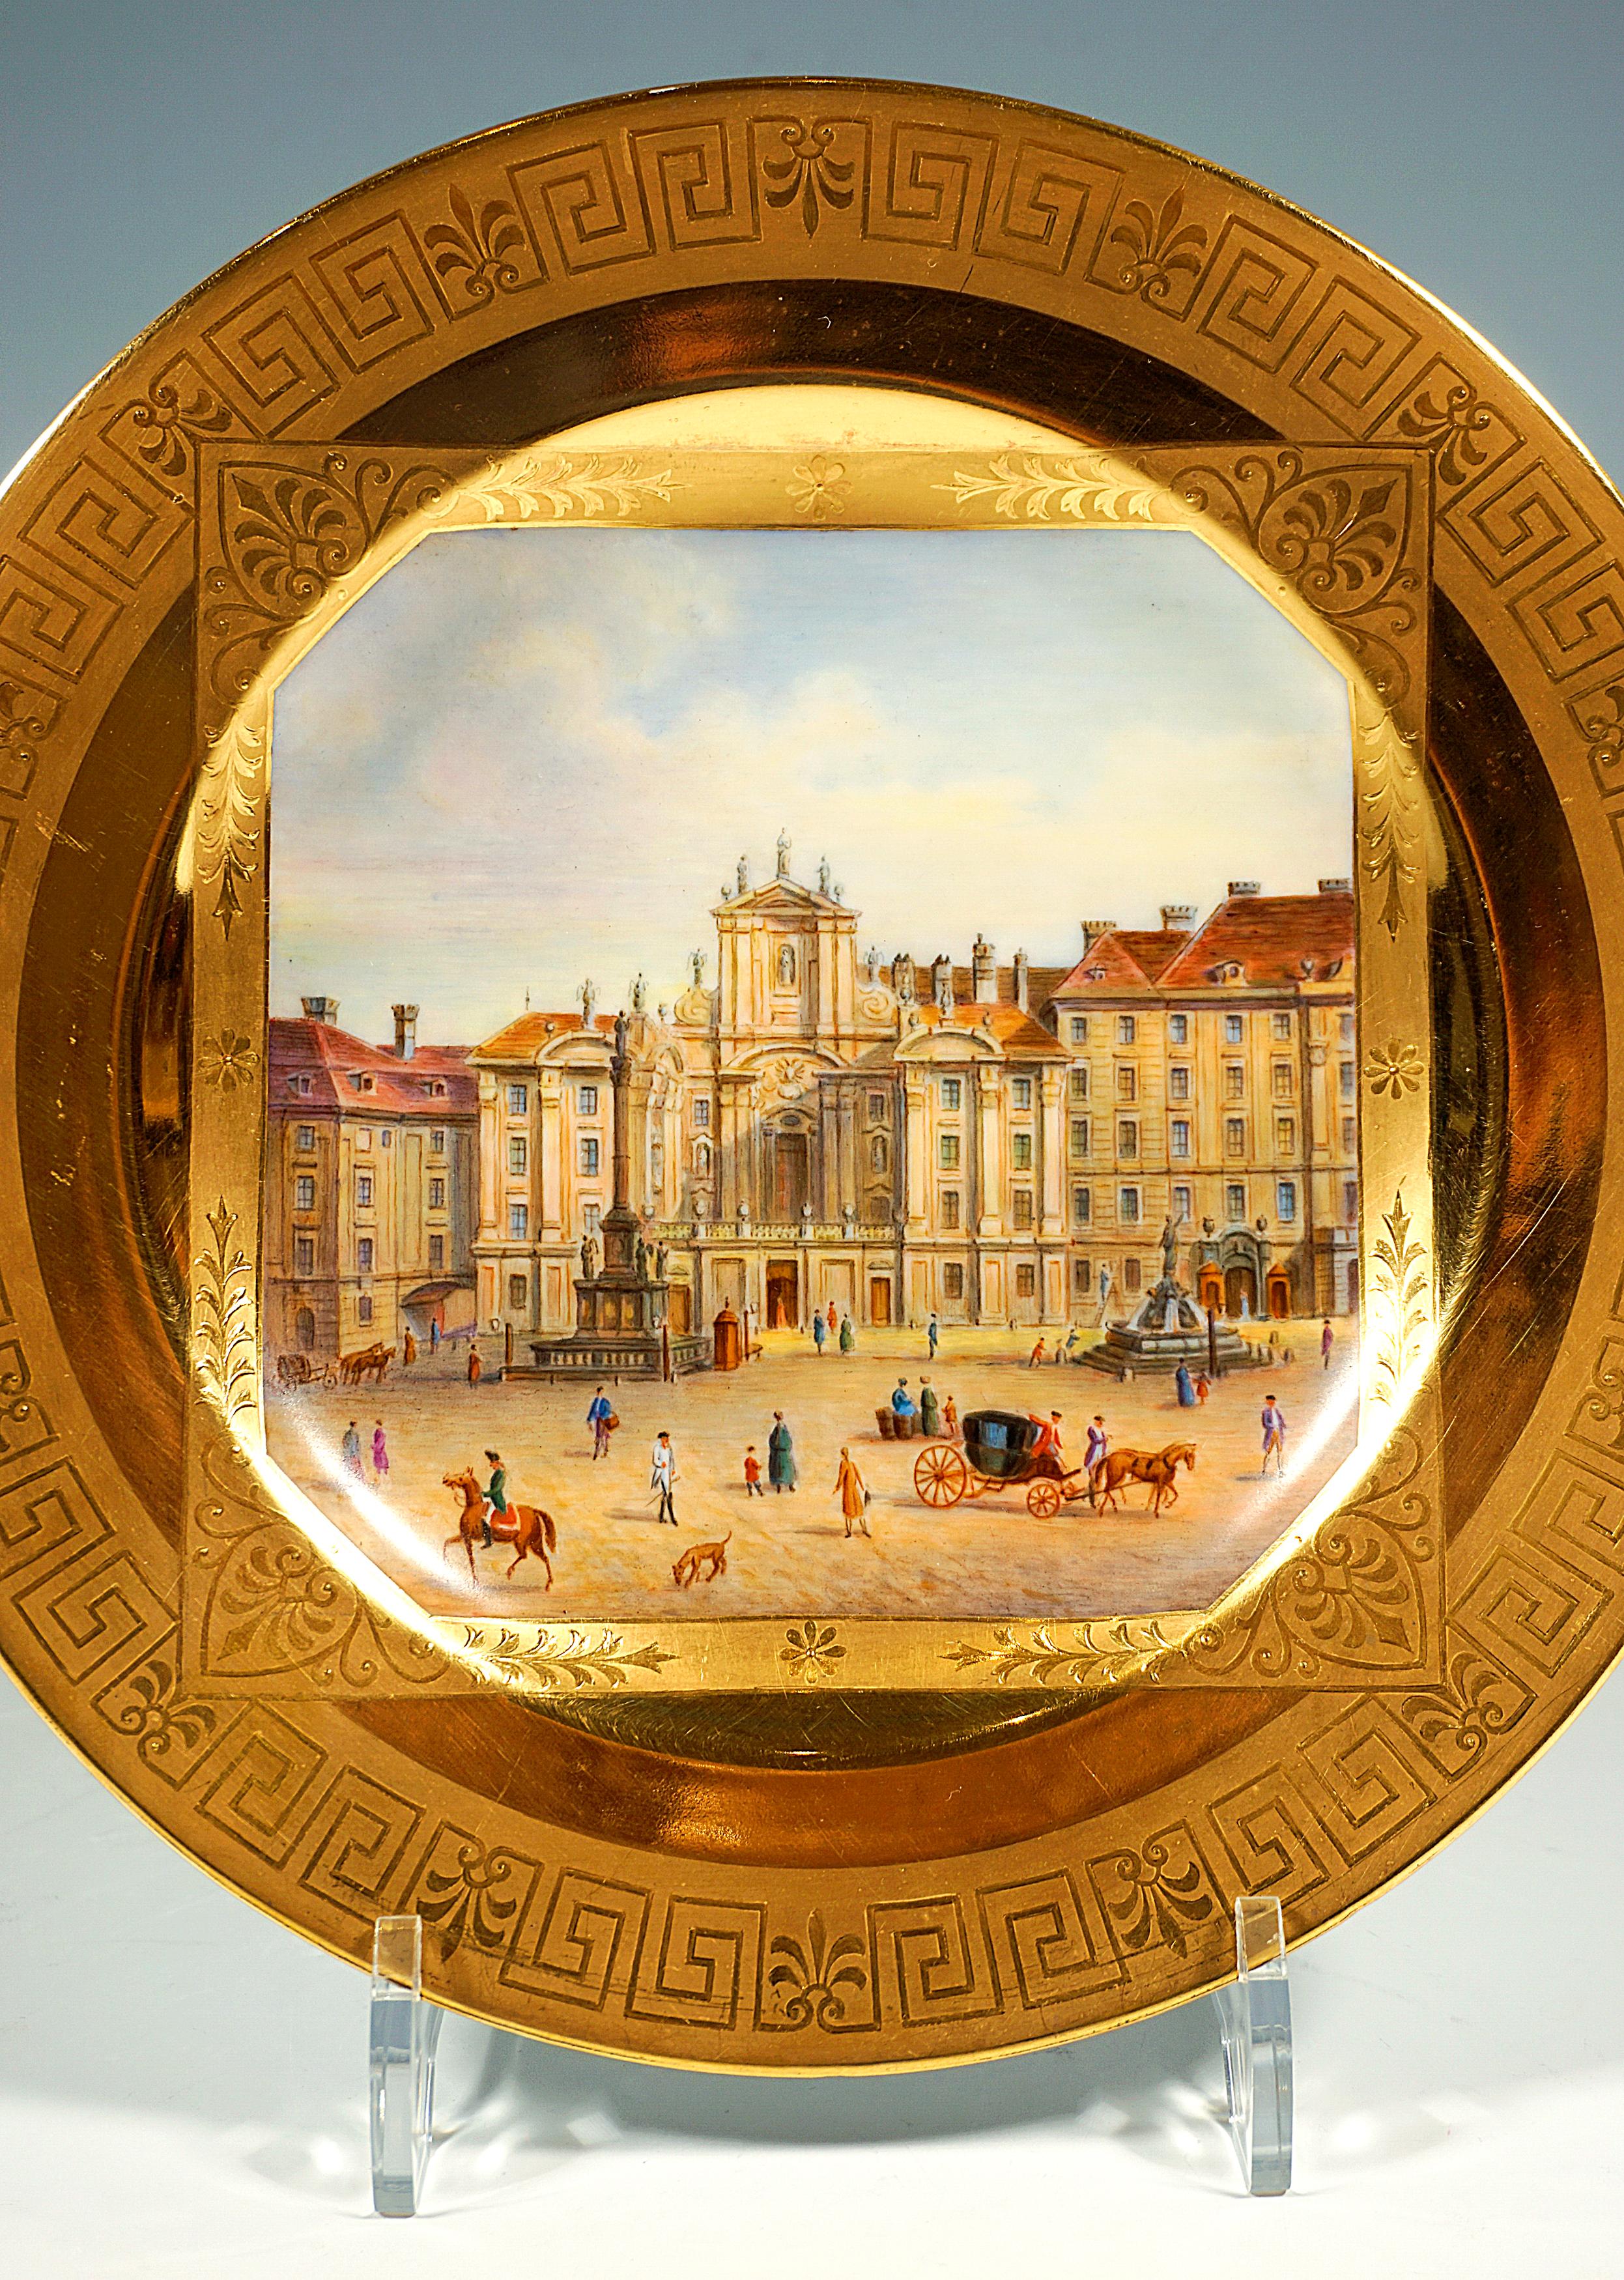 Lavishly decorated porcelain plate: Slightly concave plate, in the center large, square picture panel with beveled corners, framed by a rectangular cartouche with gold pastos on matt gold relief gold painting with stylized leaf motifs and tendrils,